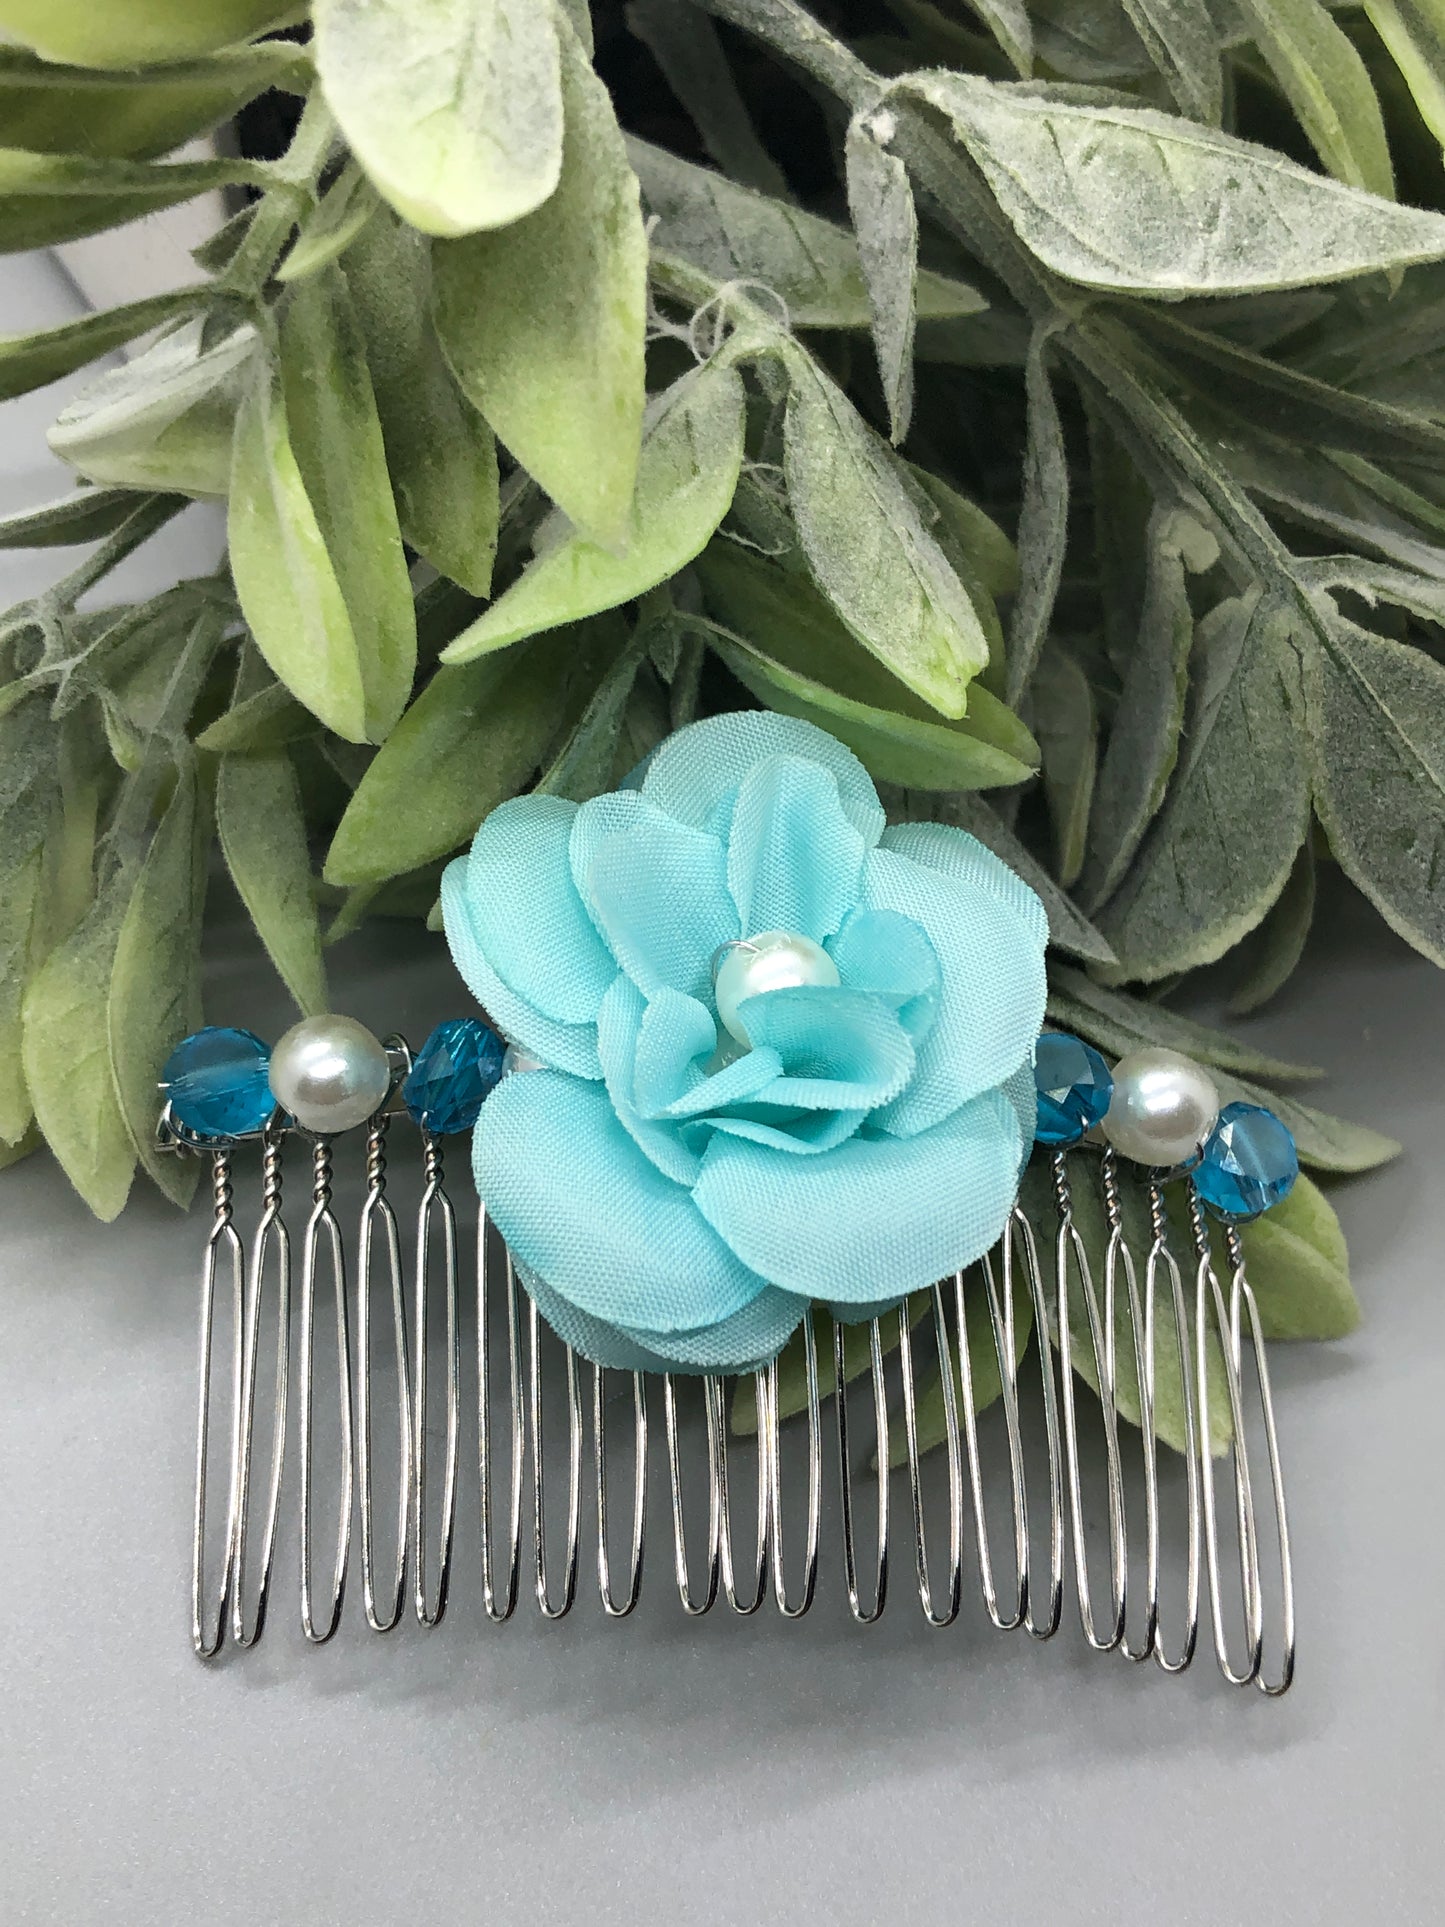 Baby Teal Flower Teal White Beads 3.5' Metal Side Comb Retro Vintage Style 1 pc